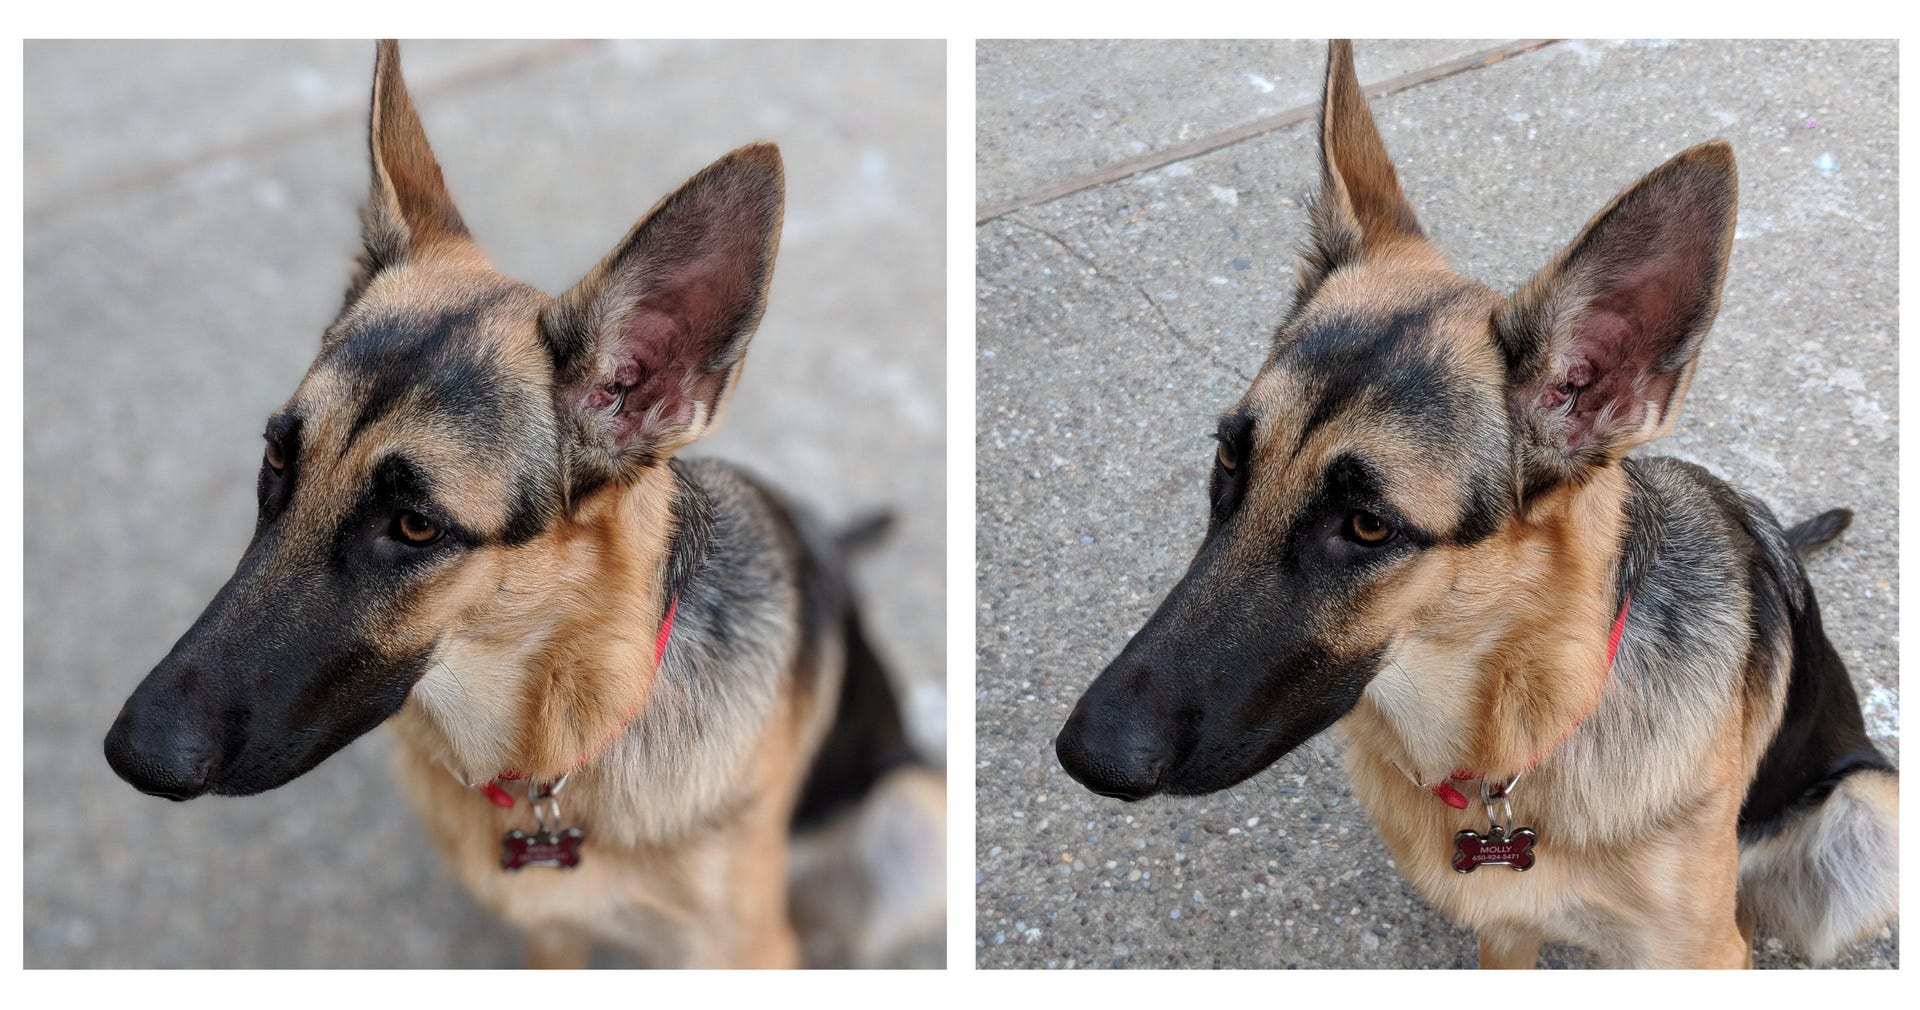 Google's Pixel 2 portrait mode works on a dog, even though it can't use machine learning that recognizes human faces. At left, portrait mode is on.